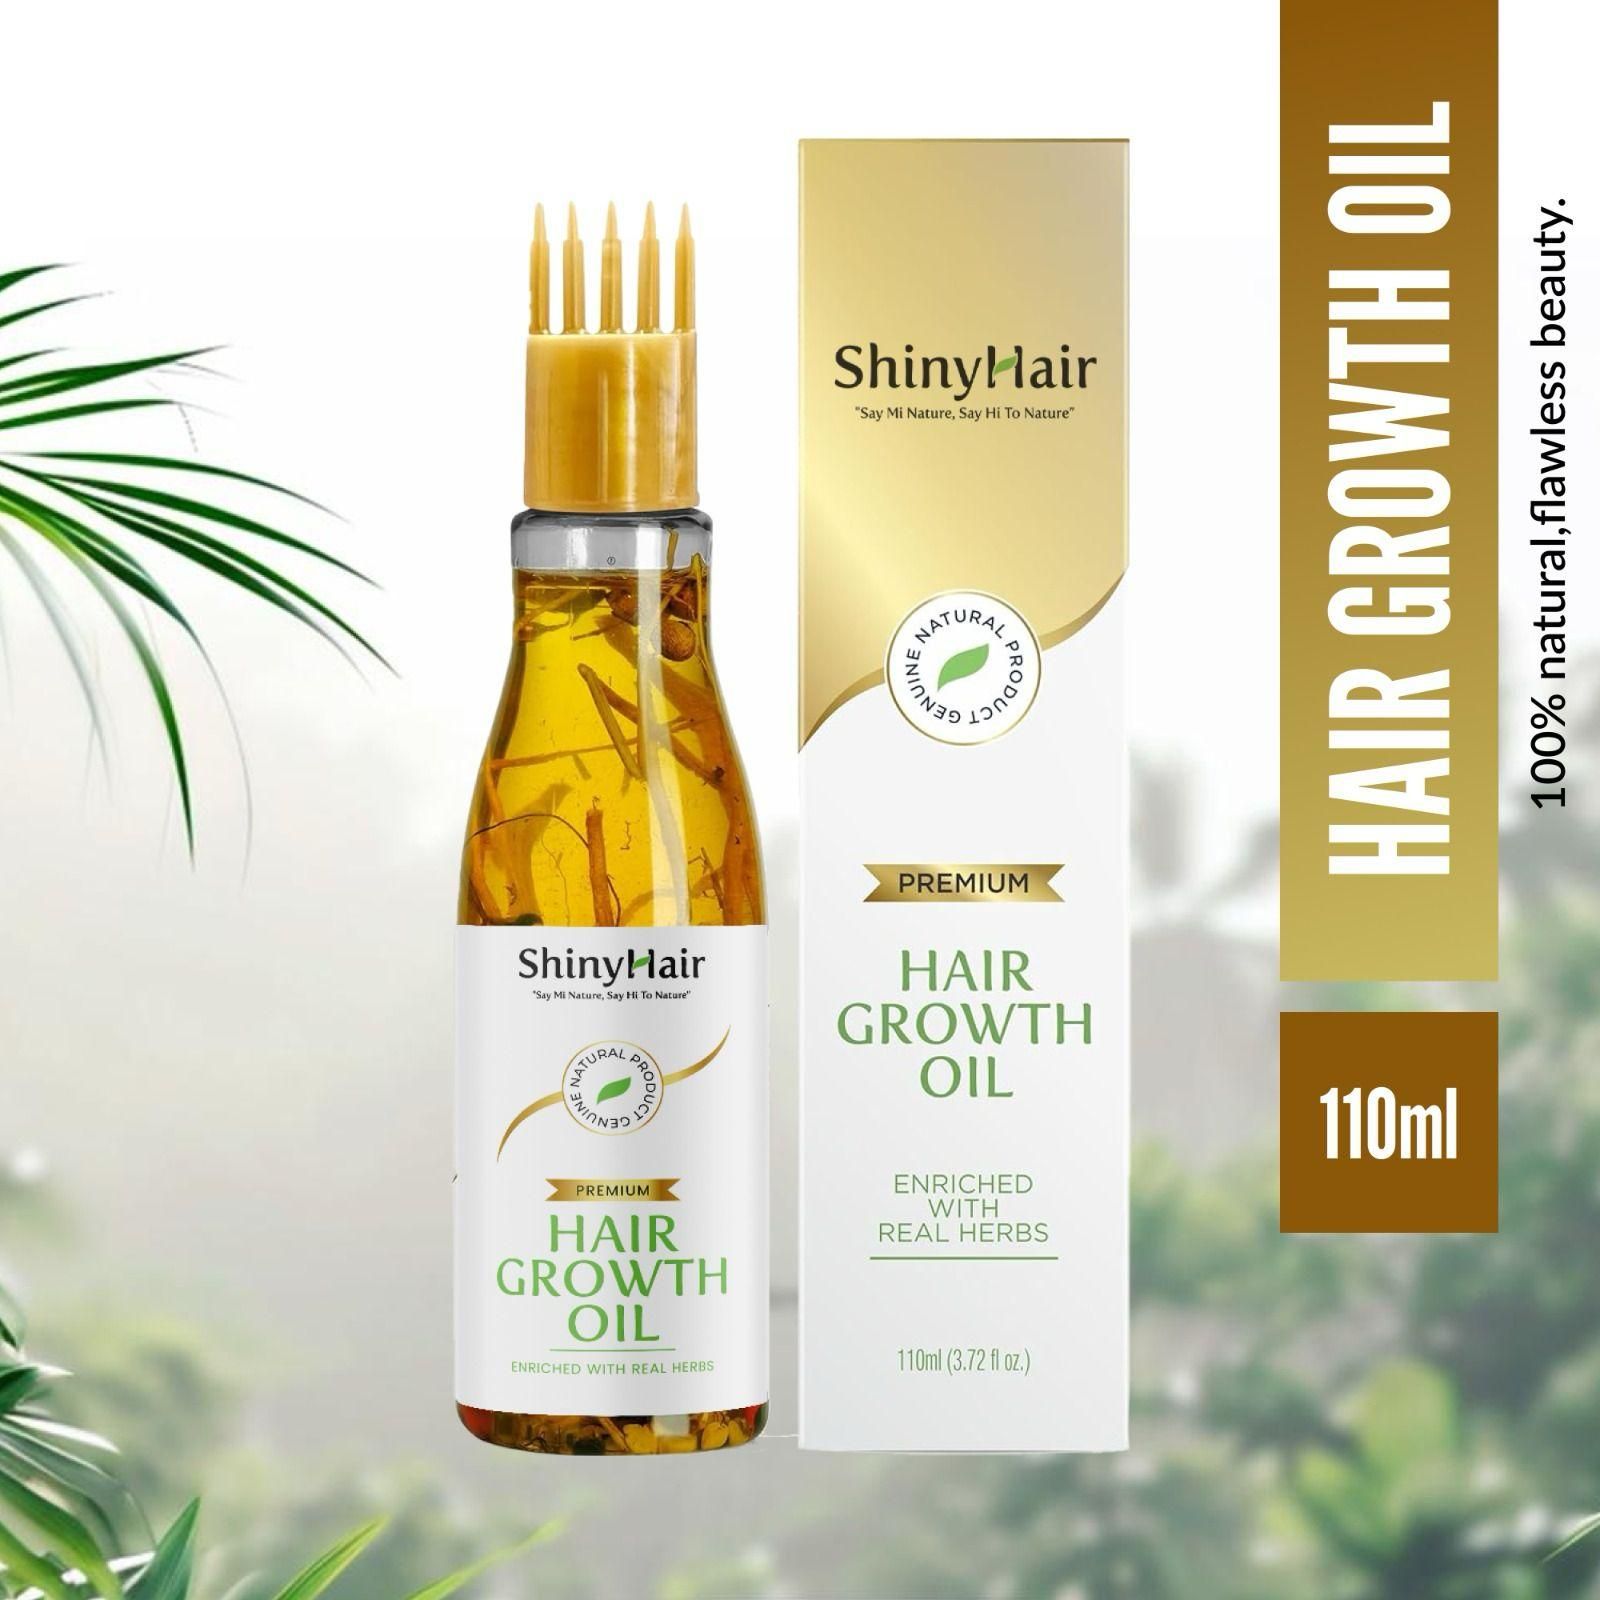 ShinyHair Growth Oil Enriched With Real Herbs 110ml